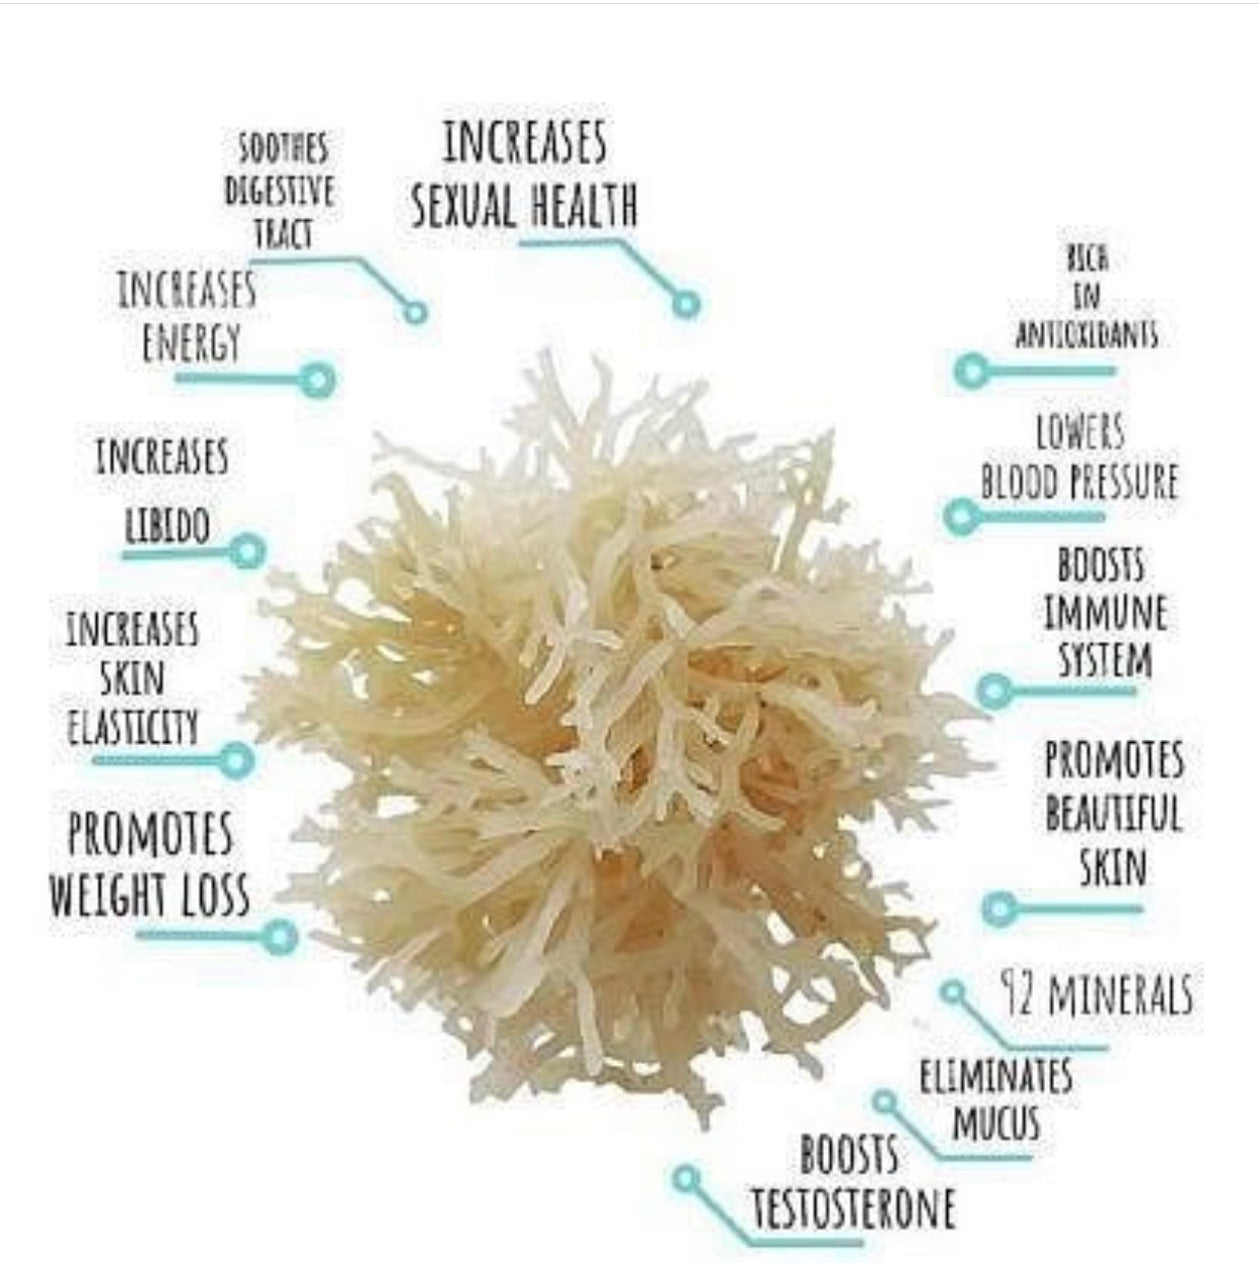 Unflavored Sea Moss Gel